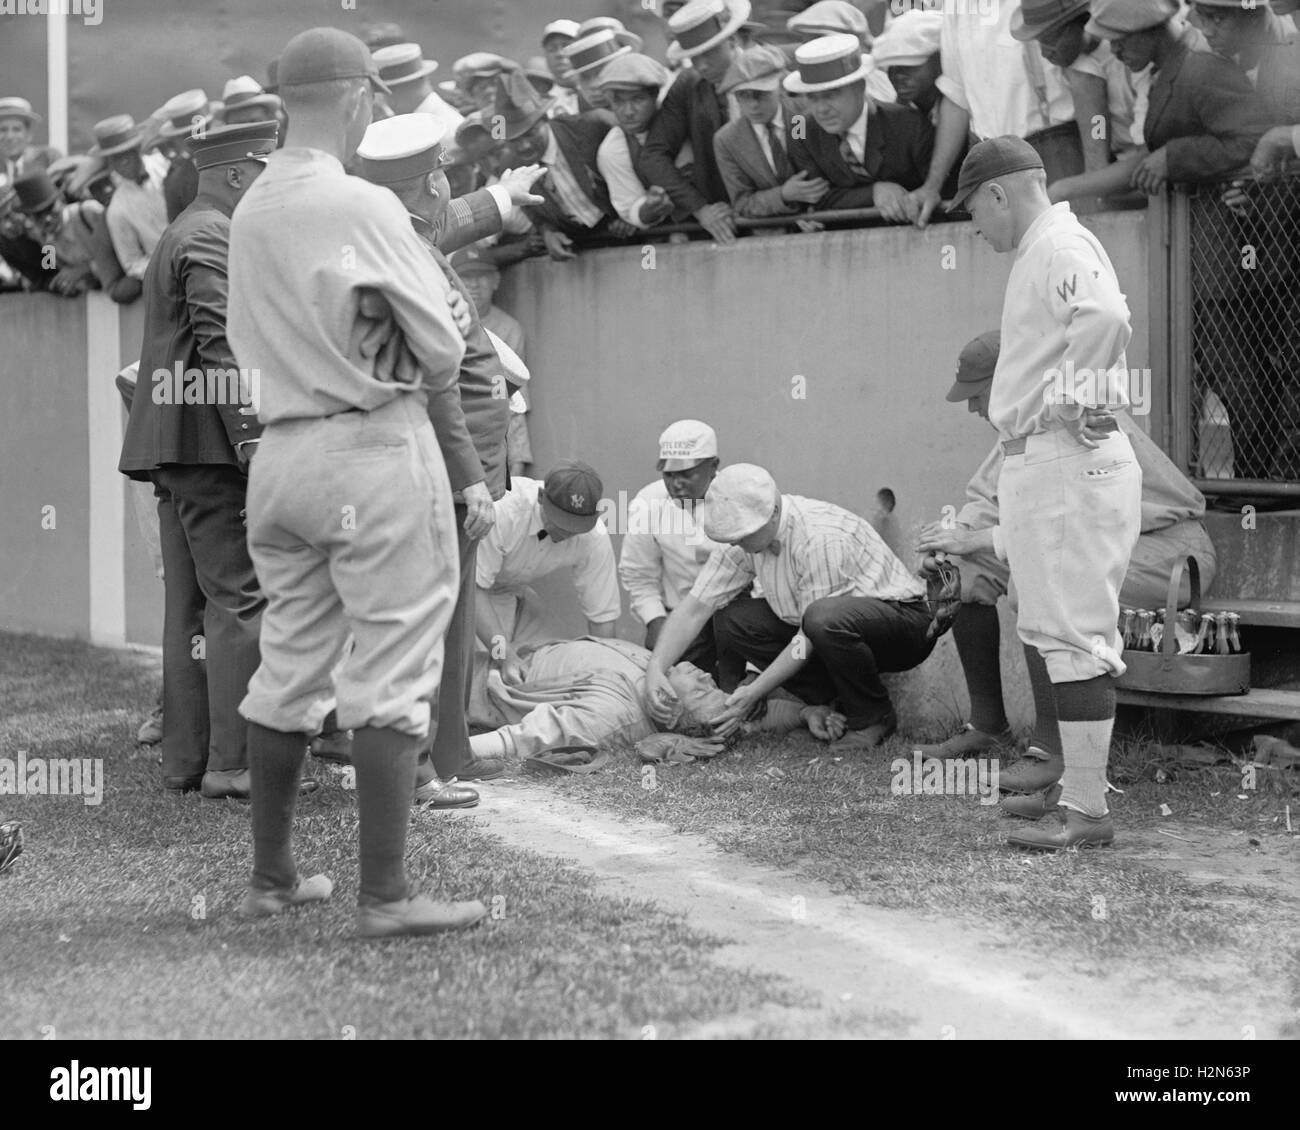 Babe Ruth, Major League Baseball Player, New York Yankees, Knocked out in front of Segregated Section of Fans during Ball Game, Washington DC, USA,  National Photo Company, July 6, 1924 Stock Photo